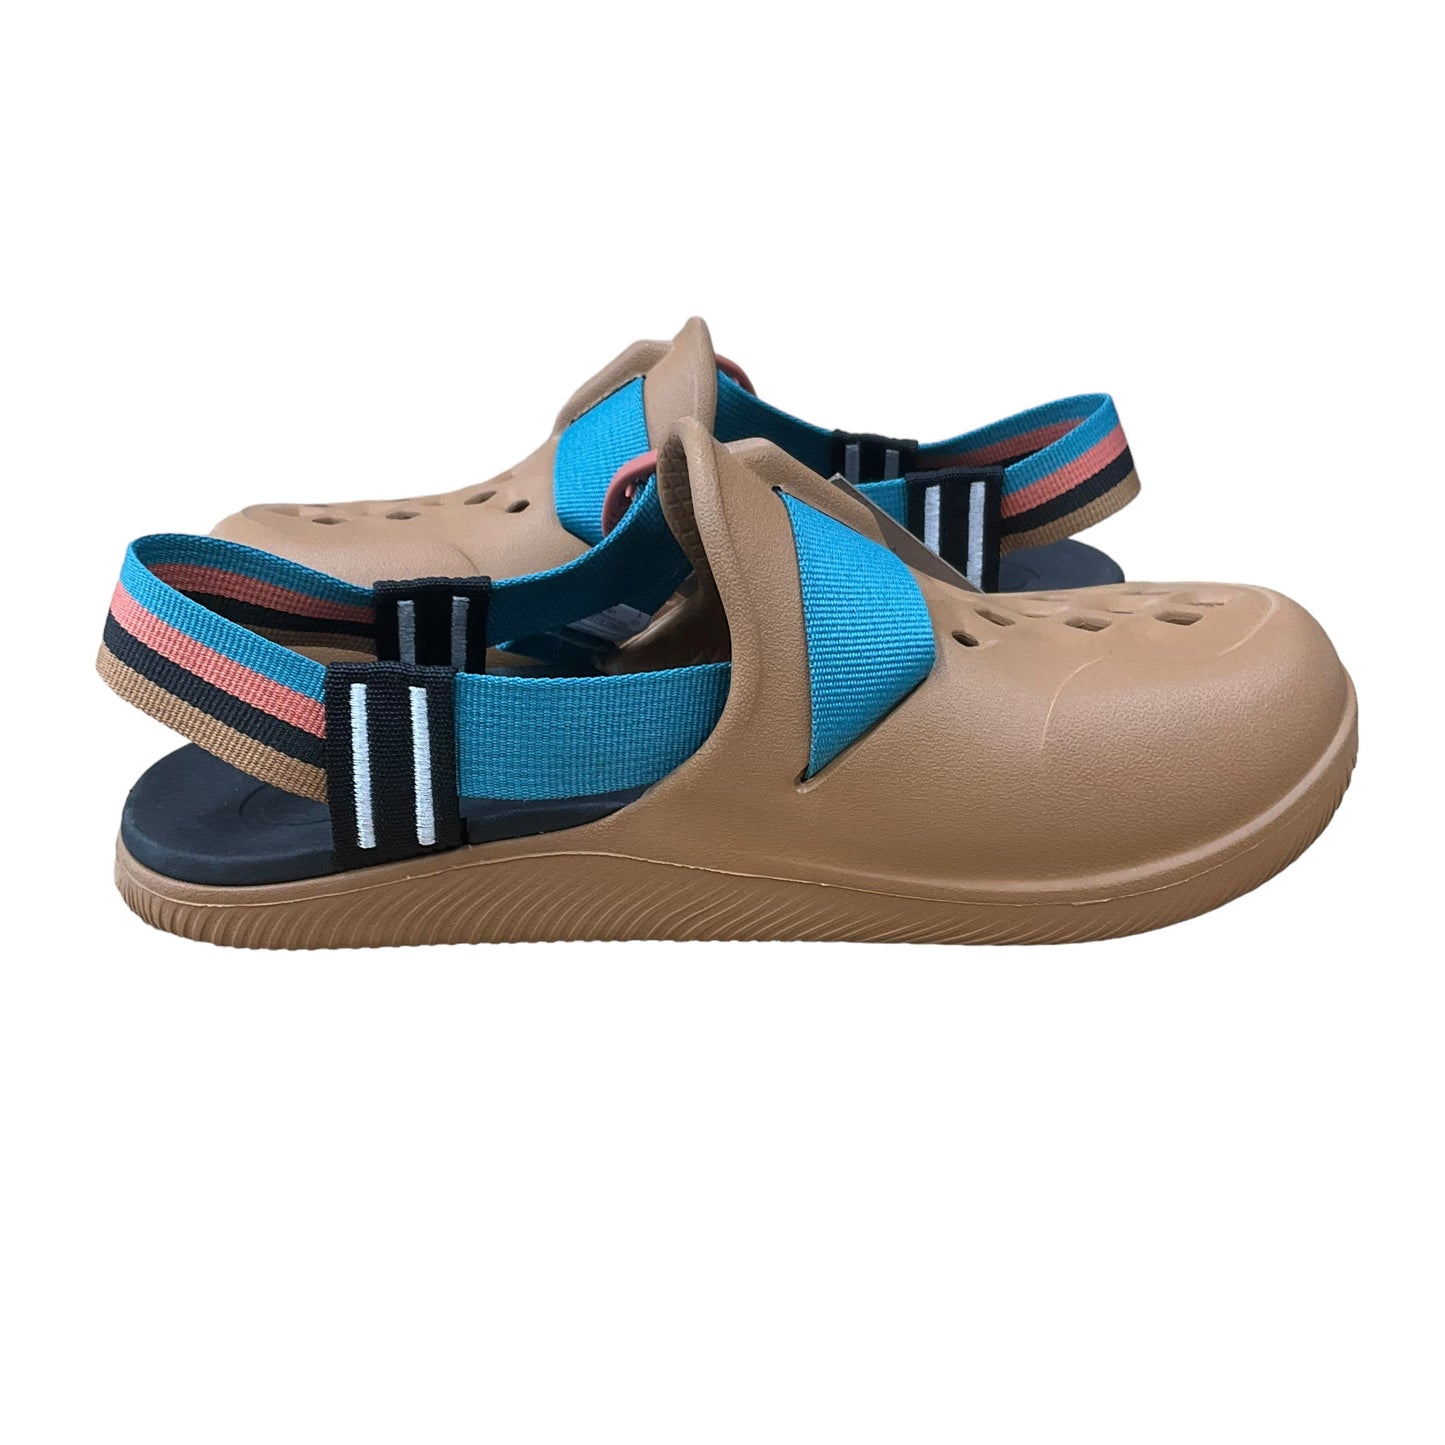 Blue & Brown Sandals Sport Chacos, Size 8